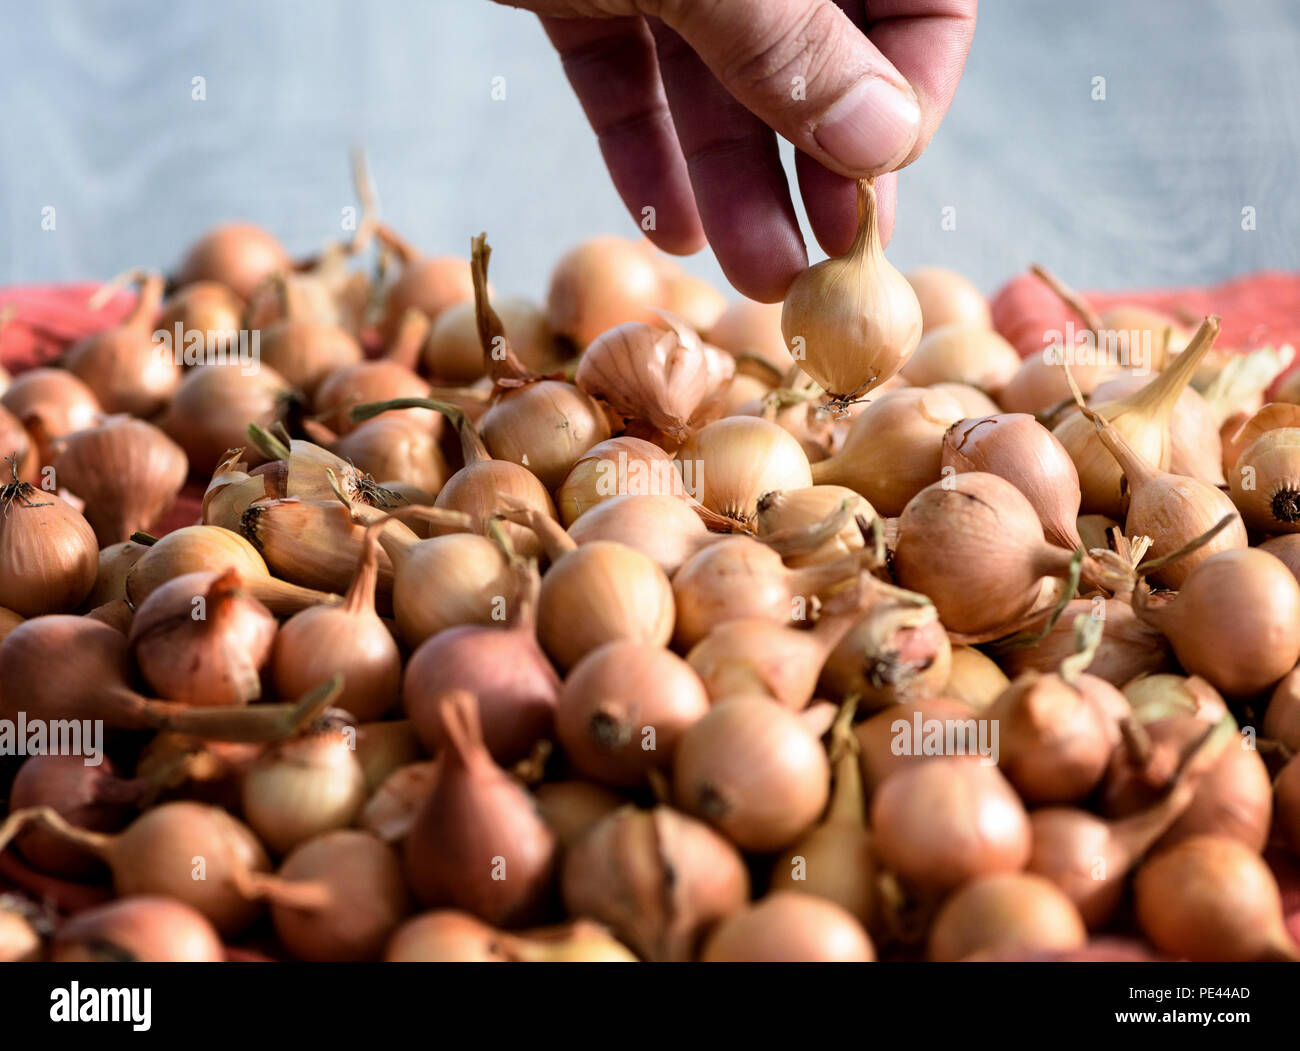 Image of a male caucasian hand picking up a single onion from a set for planting in a garden. Selecting the alium ready for the vegetable garden. Stock Photo